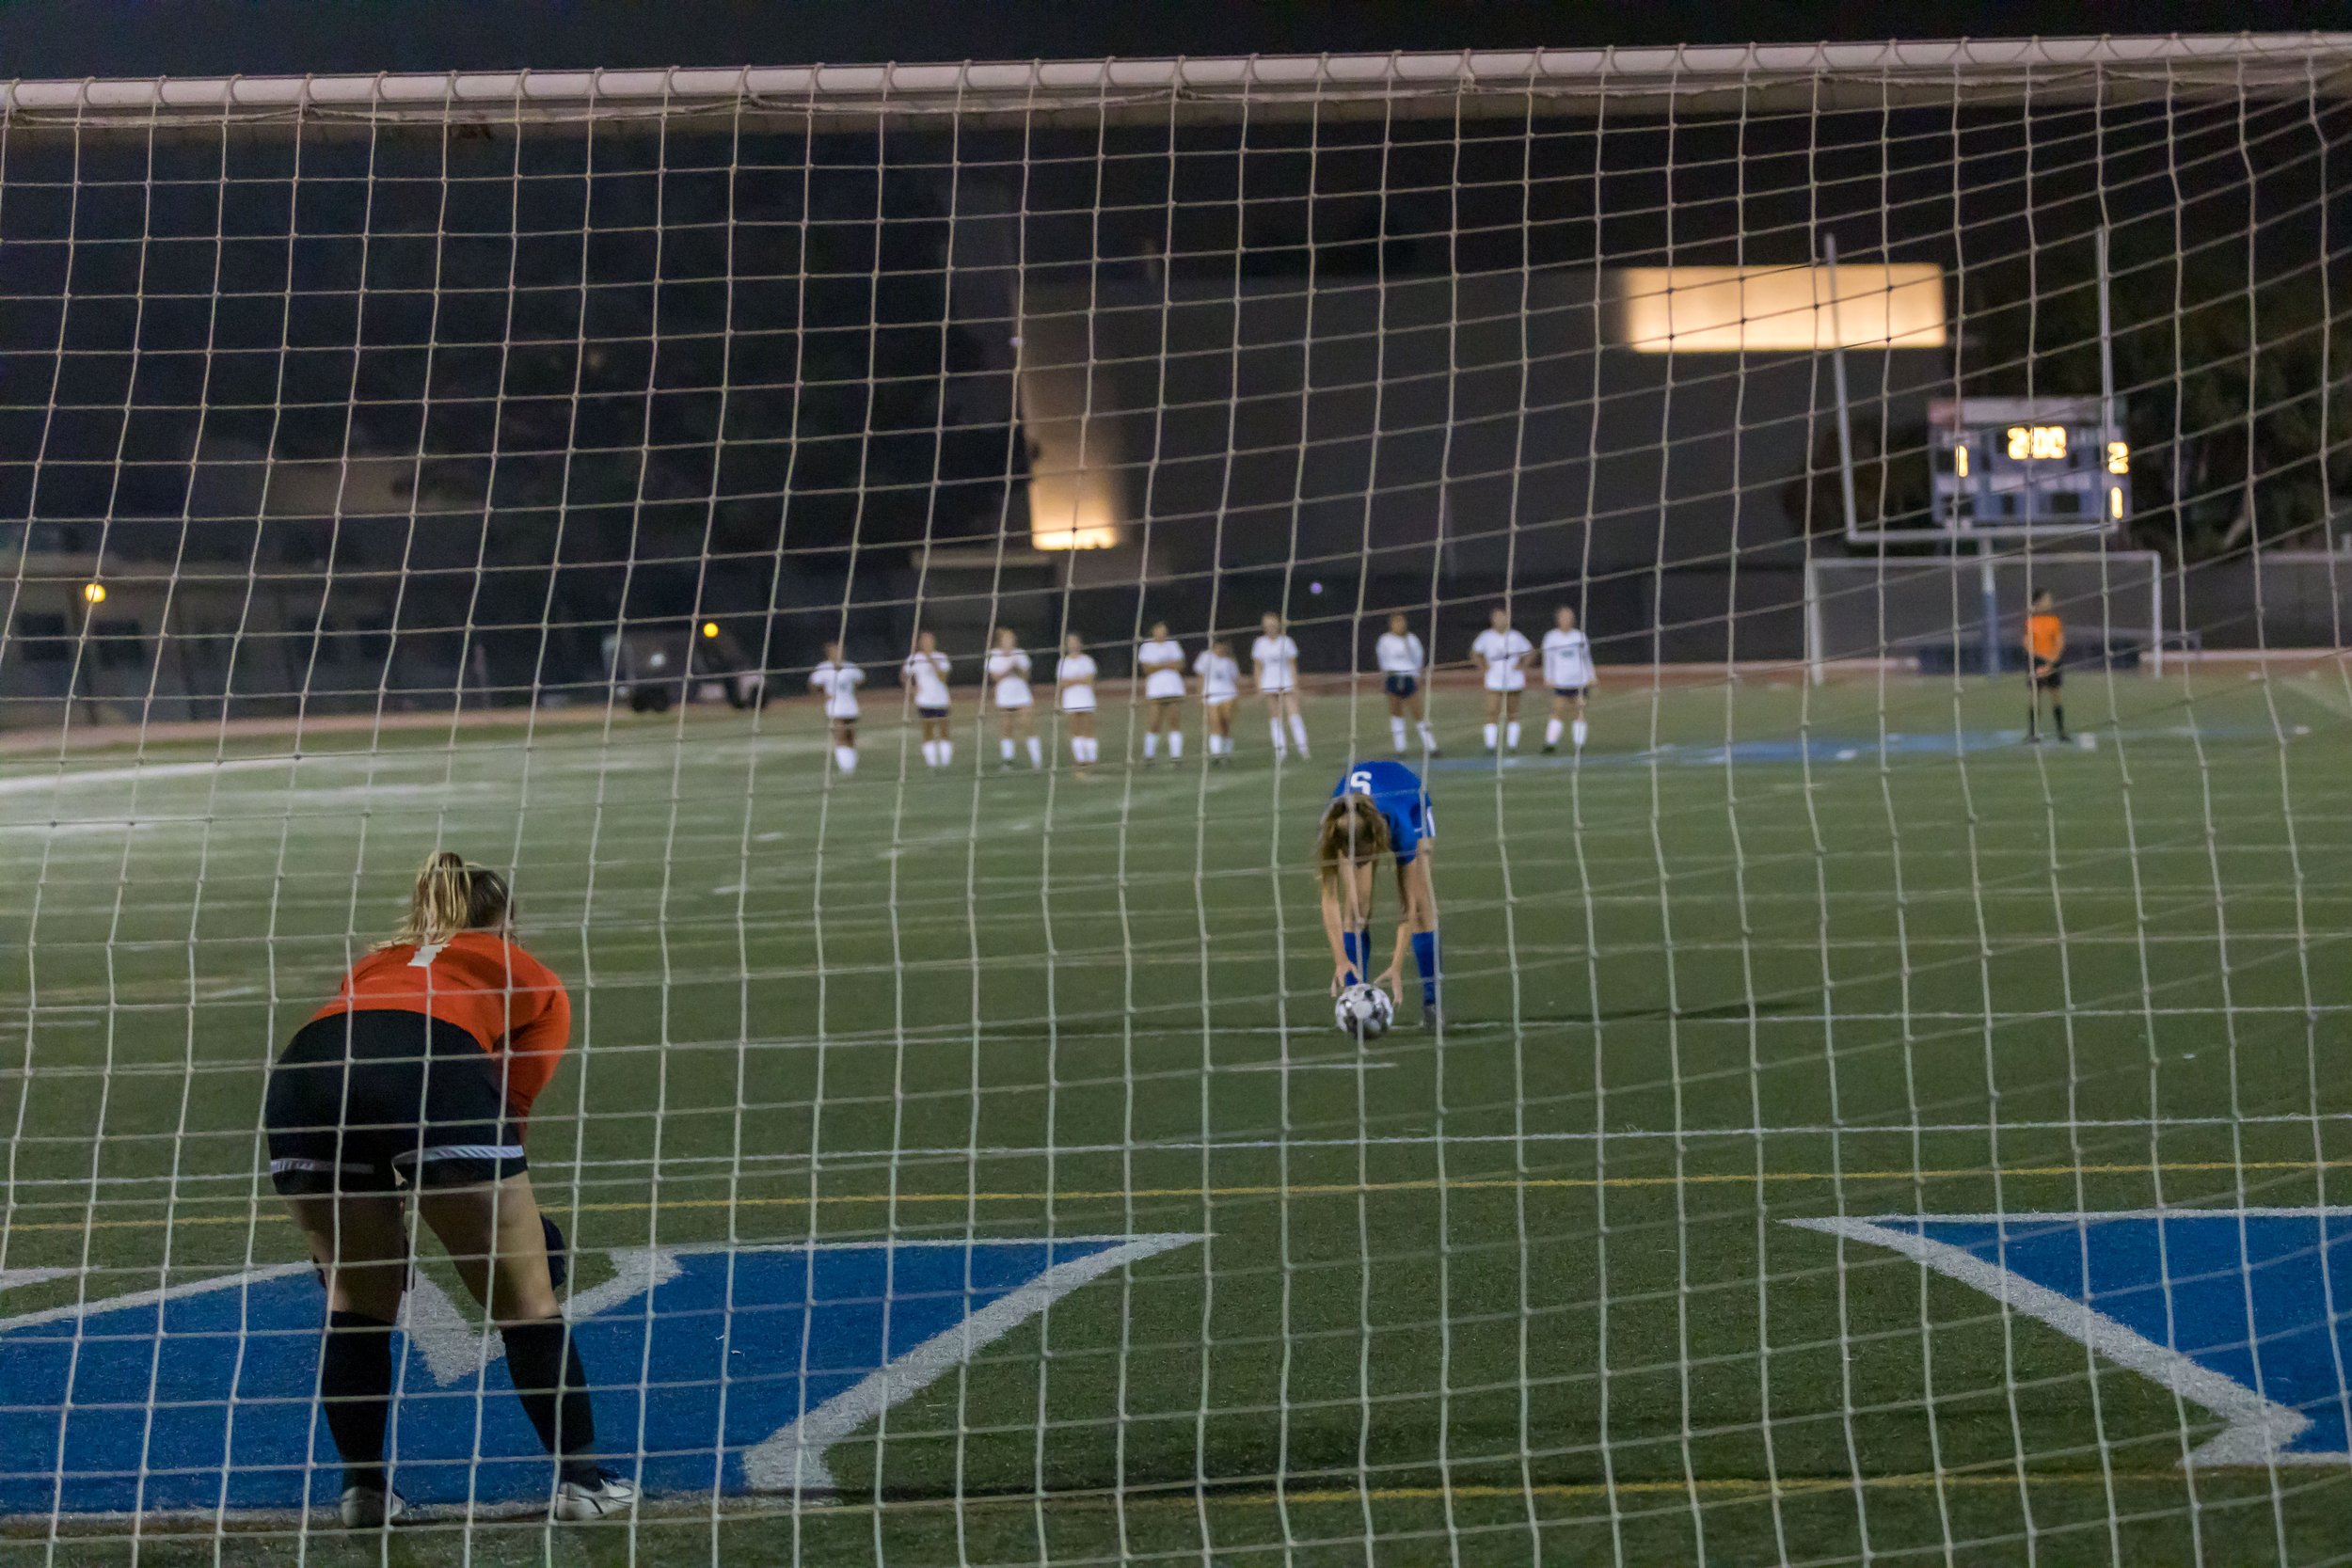  Freshman Charlie Kayem sets the ball for a penalty kick in OT2. Santa Monica College played against El Camino College in a California Community College Women's Soccer Southern California Regional Play-In game on November 18, 2021. The game was a 1-1